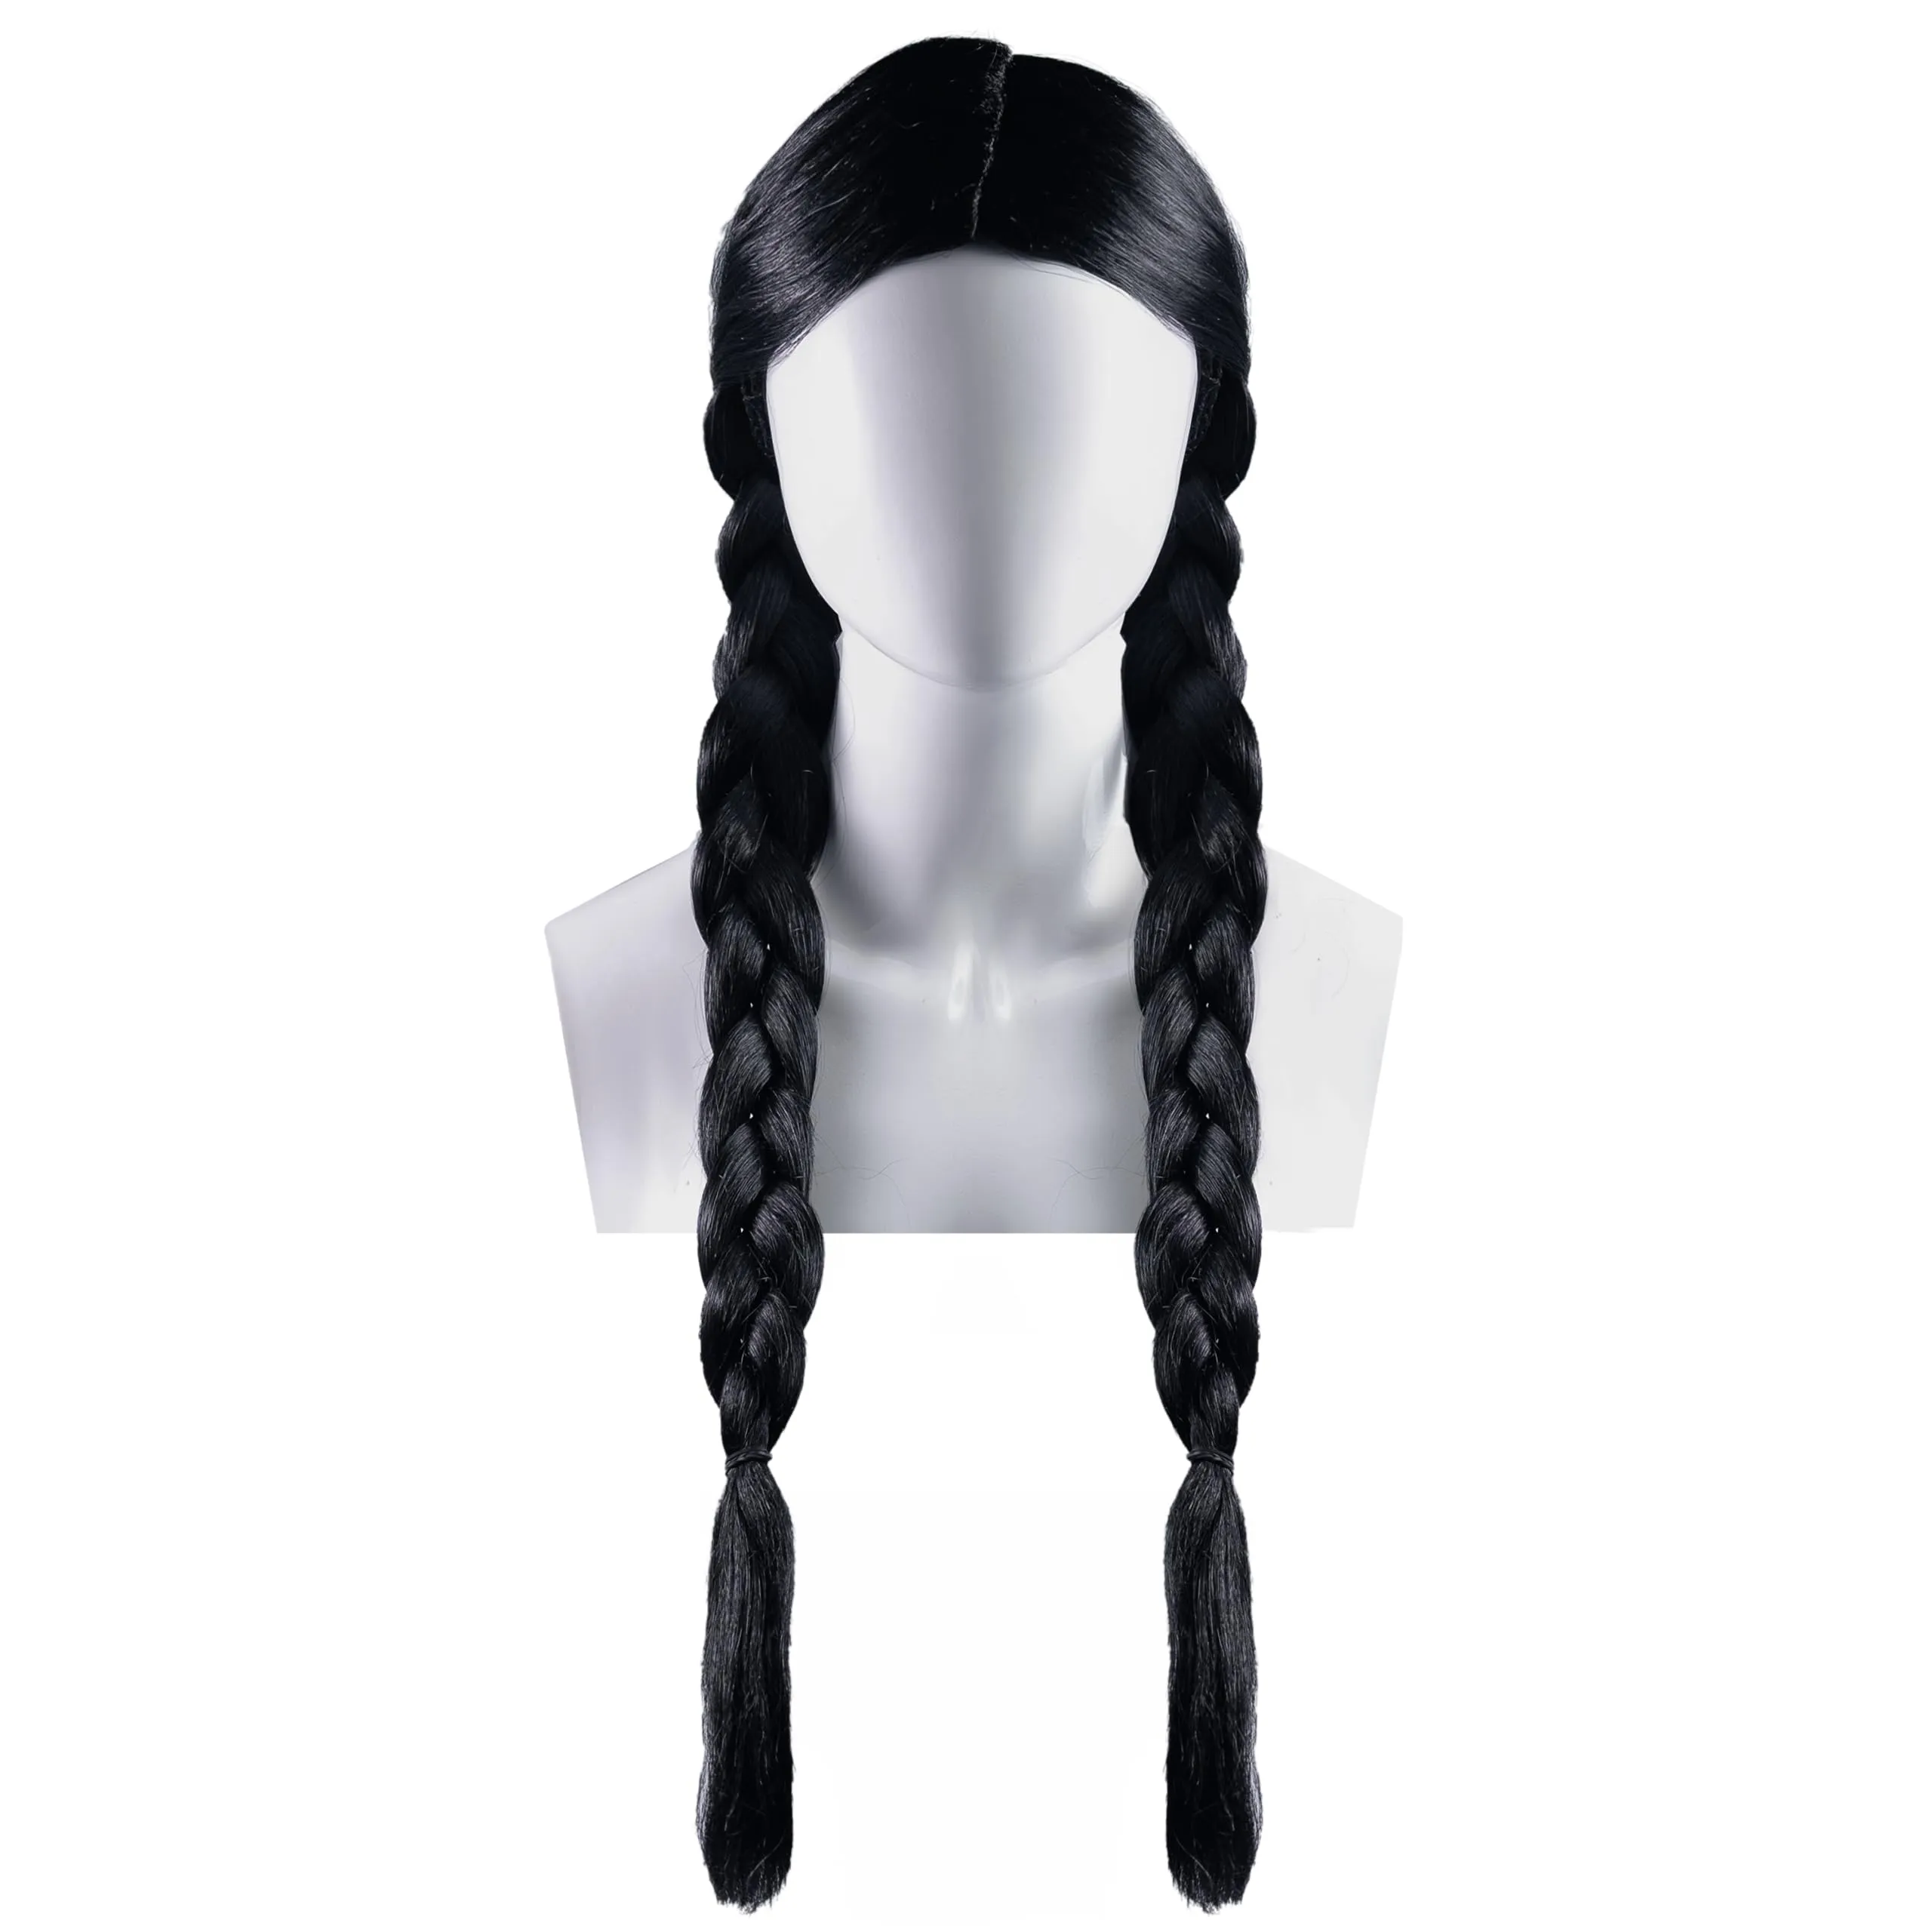 GET THIS FREE BEAUTIFUL BLACK BRAIDED HAIR NOW IN ROBLOX!!! 